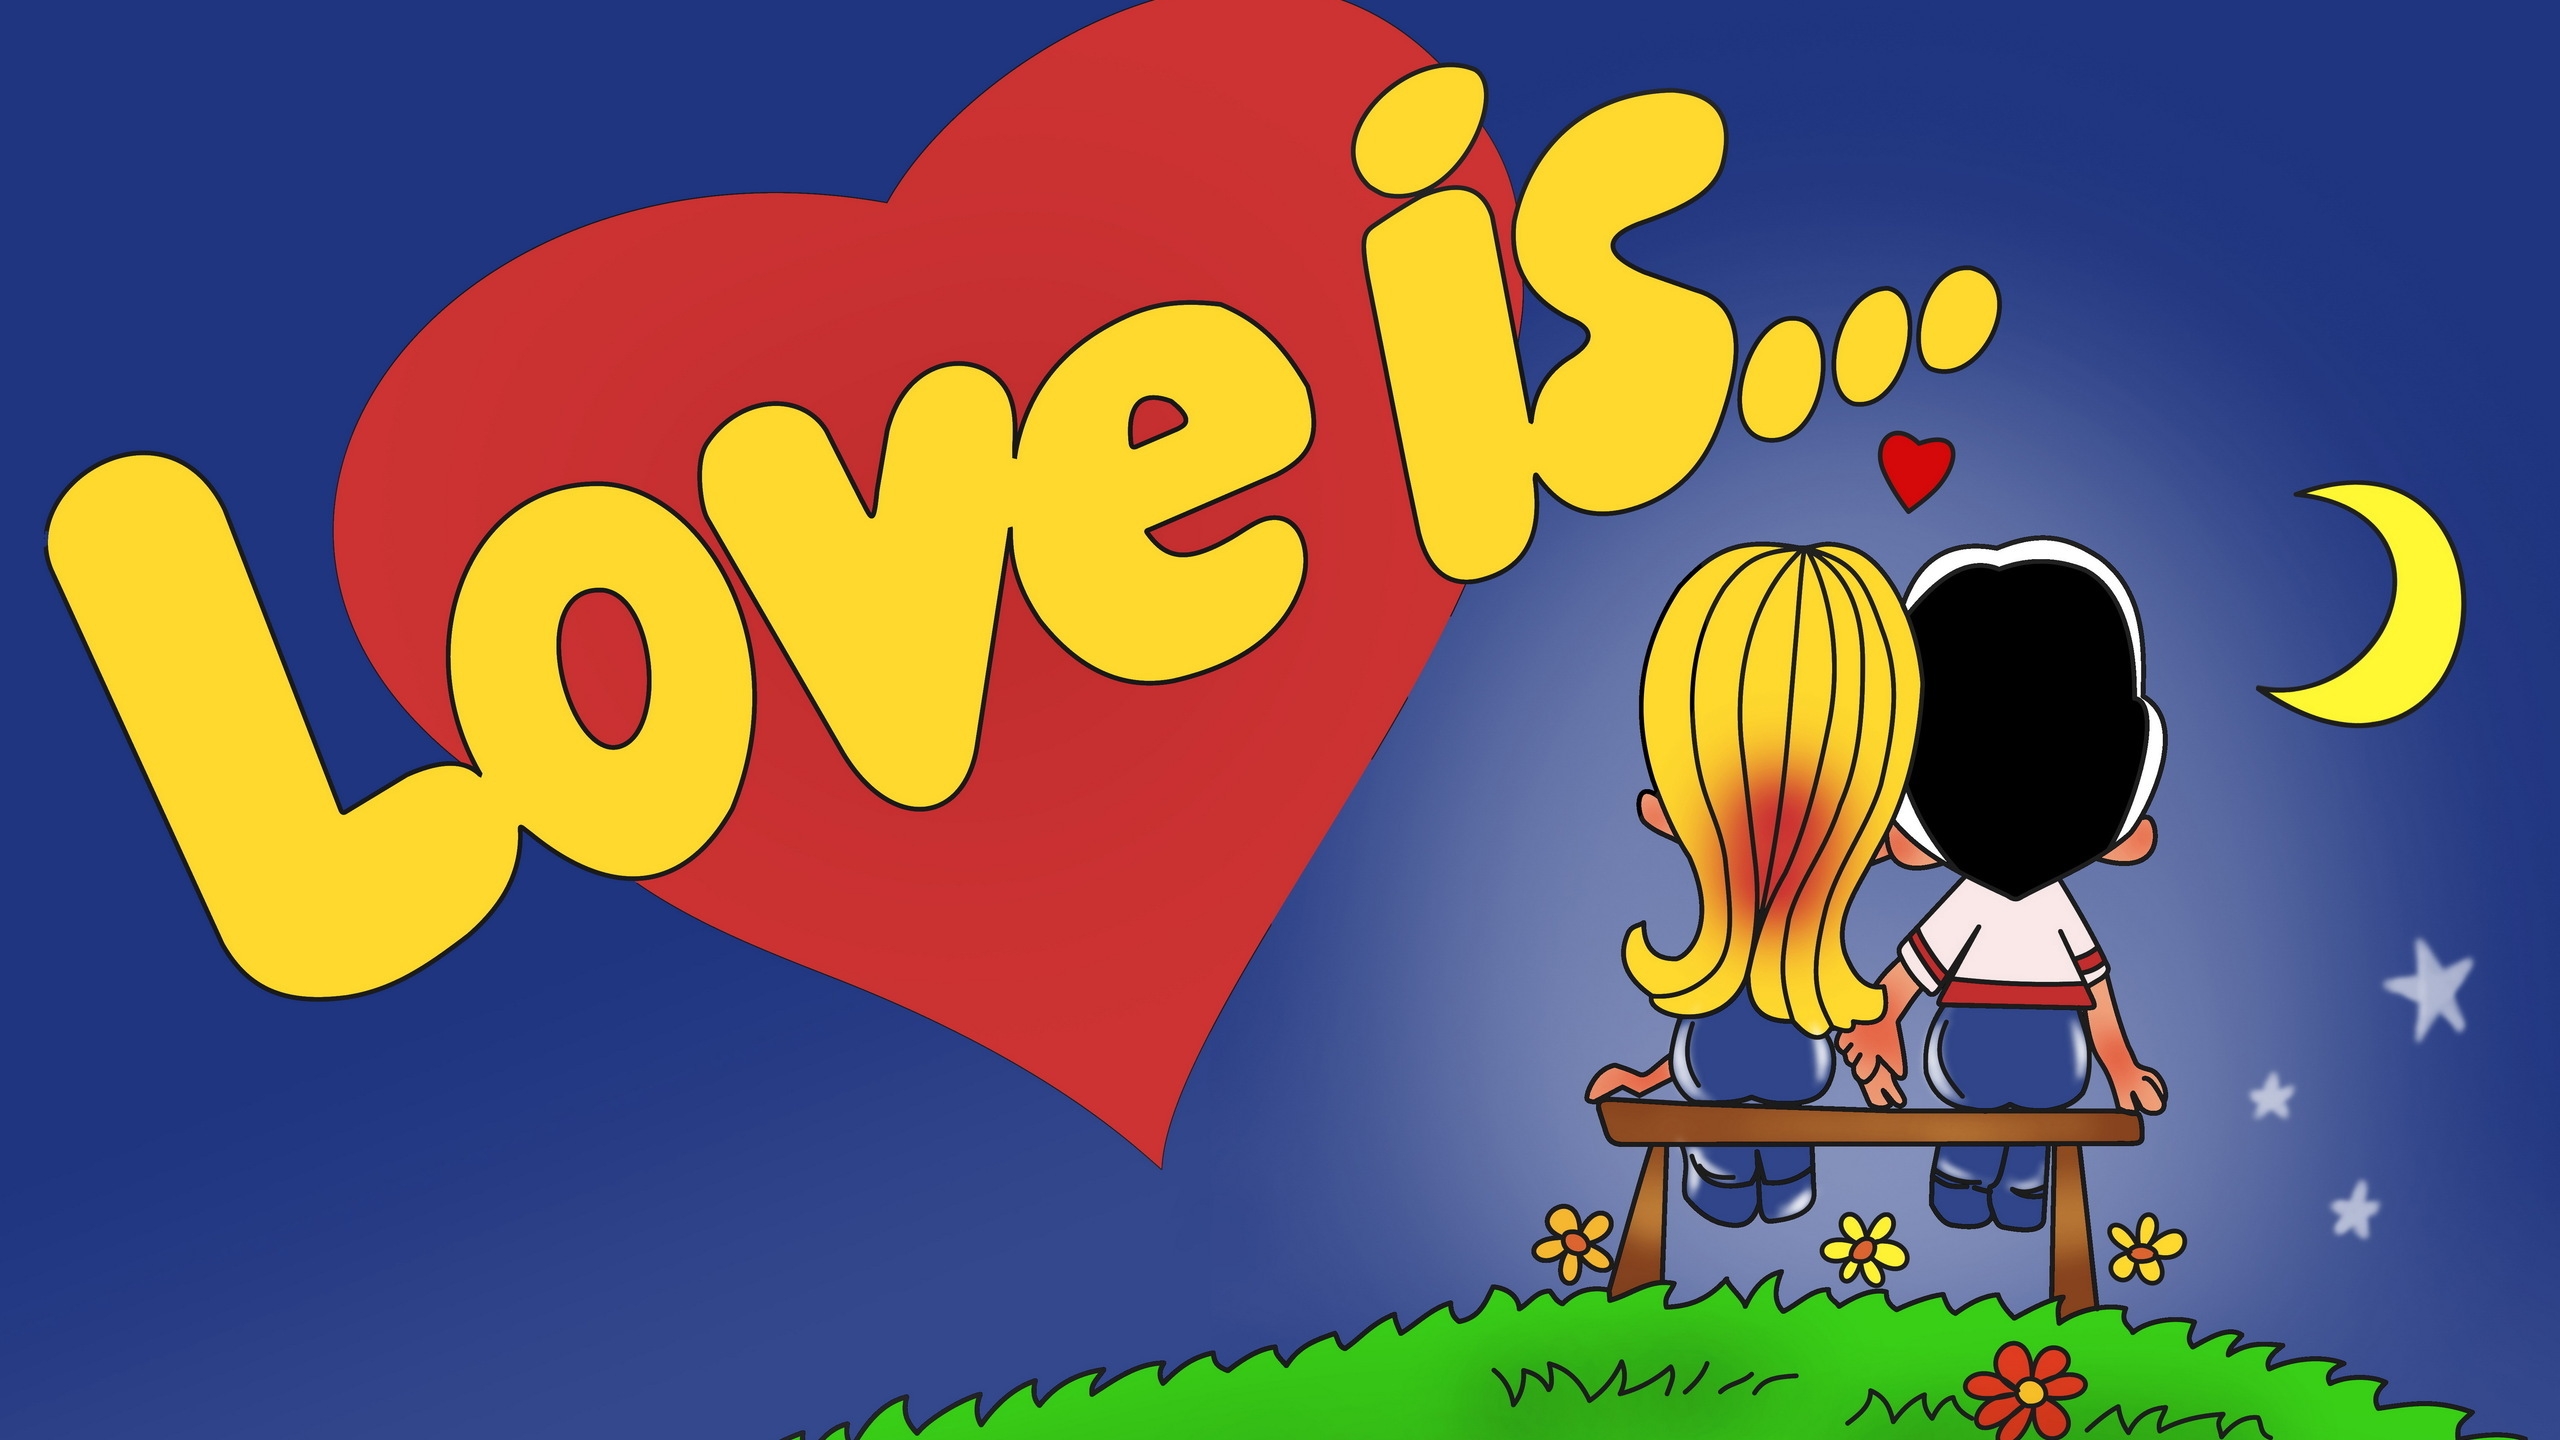 Love is for 2560x1440 HDTV resolution